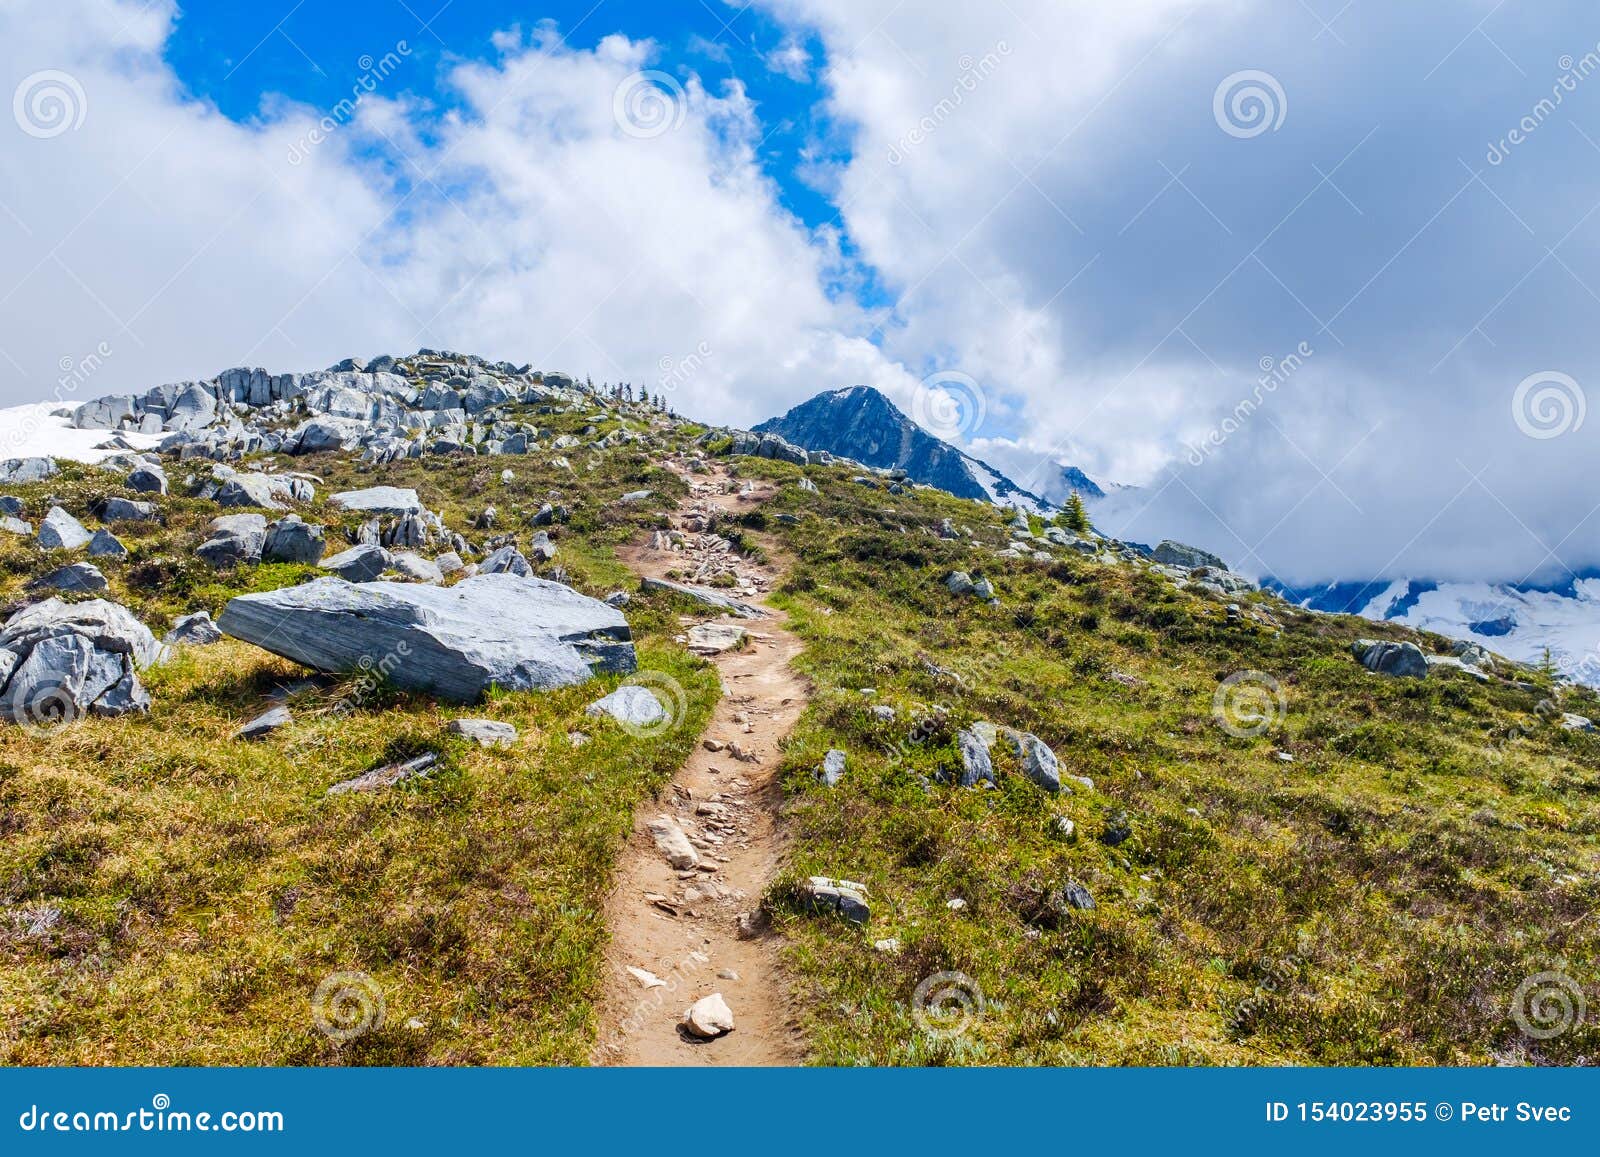  Hiking Trail in Alpine Nature Stock Image - Image of hike .